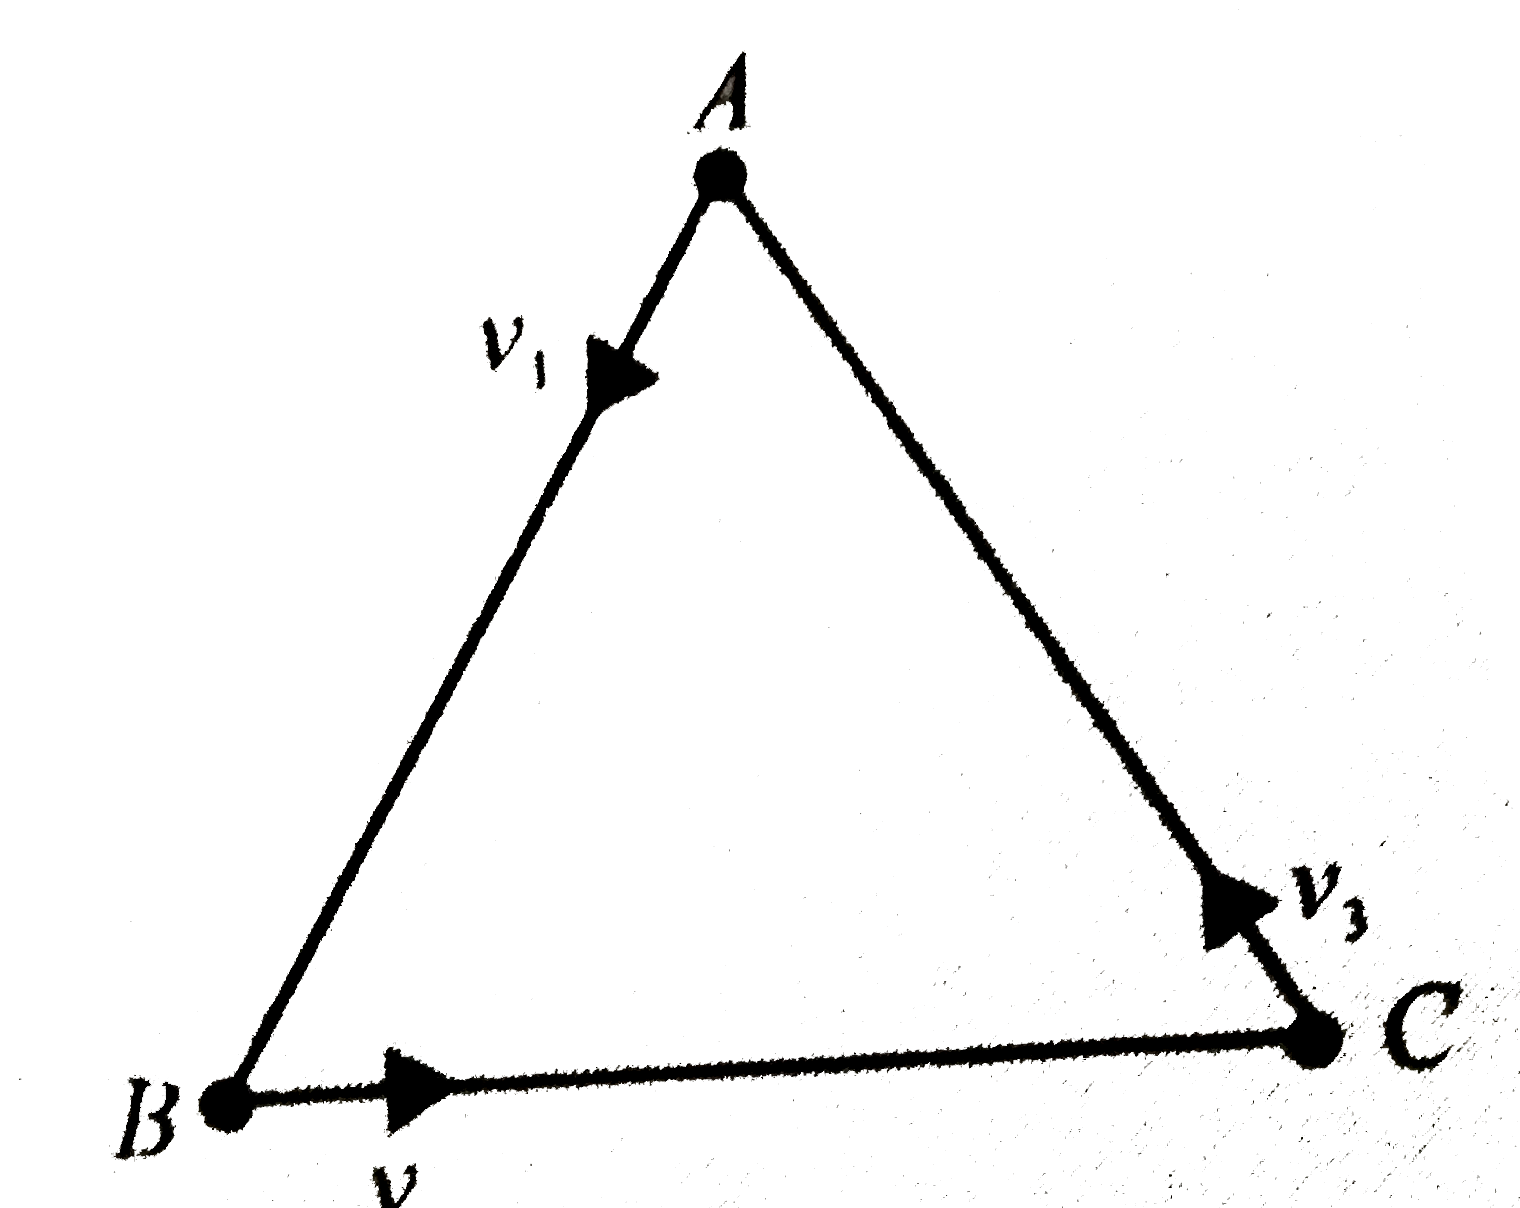 Let there are three equal masses situated at the vertices of an equilateral triangle, as shown in Fig. Now particle A starts with a velocity v(1) towards line AB, particle B starts with the velocity v(2), towards line BC and particle C starts with velocity v(3) towards line CA. Find the displacement of the centre of mass of the three particles A, B and C after time t. What would it be if v(1)=v(2)=v(3)?